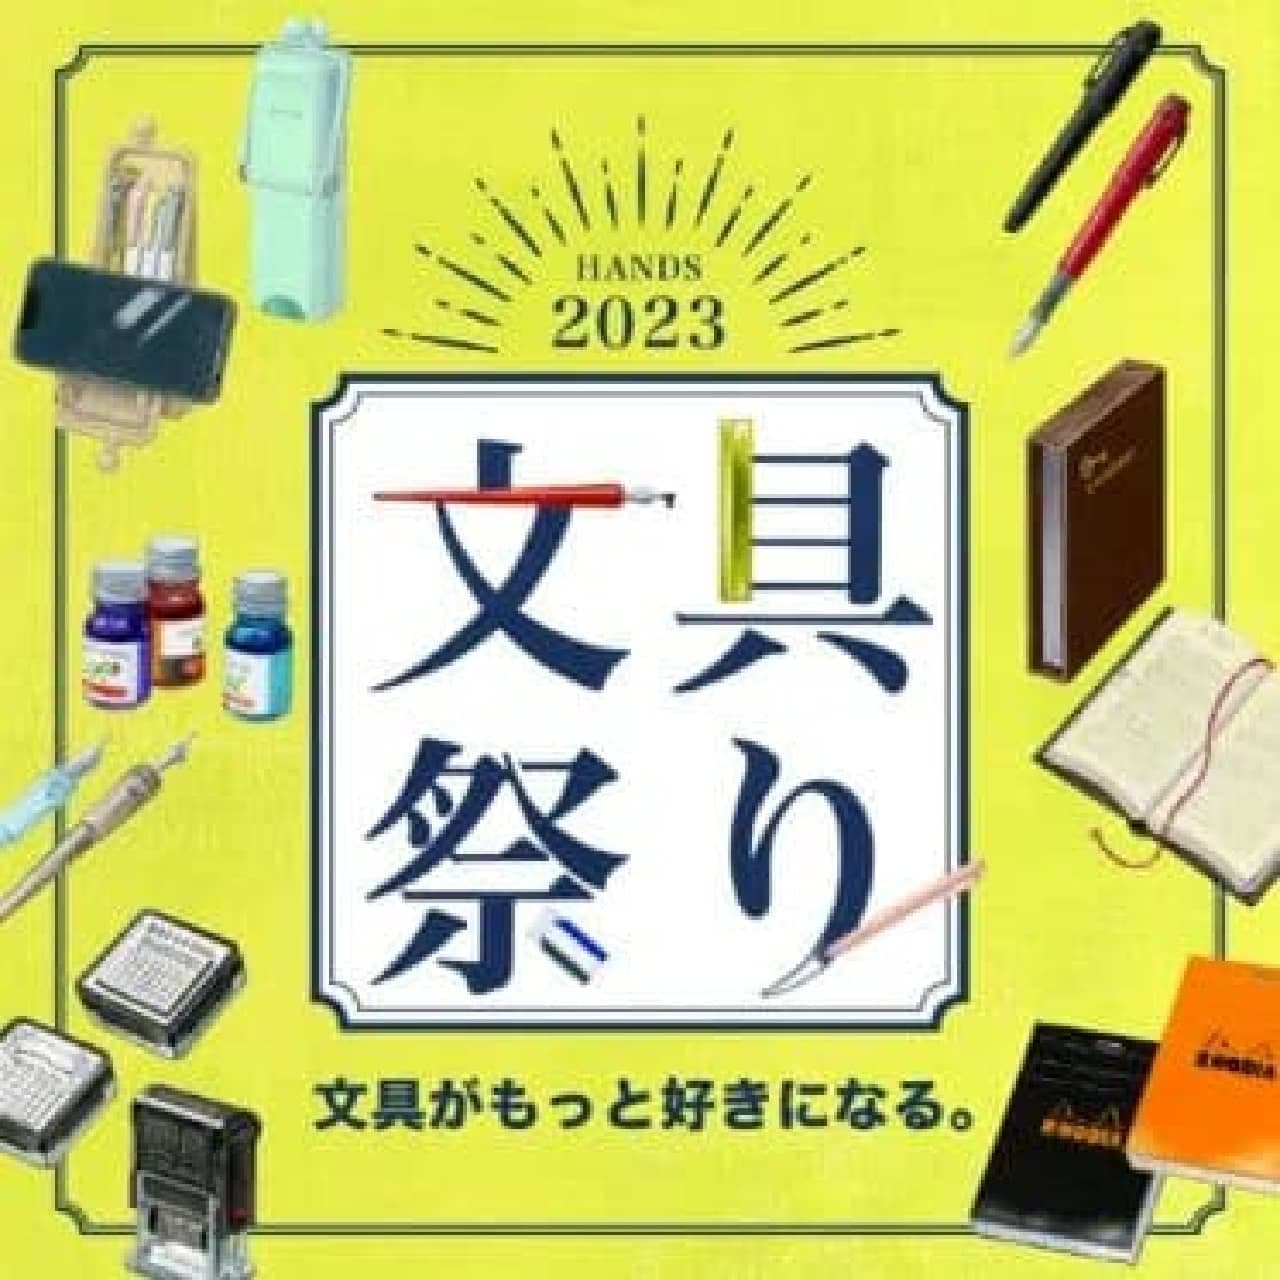 Hands "Stationery Festival 2023"